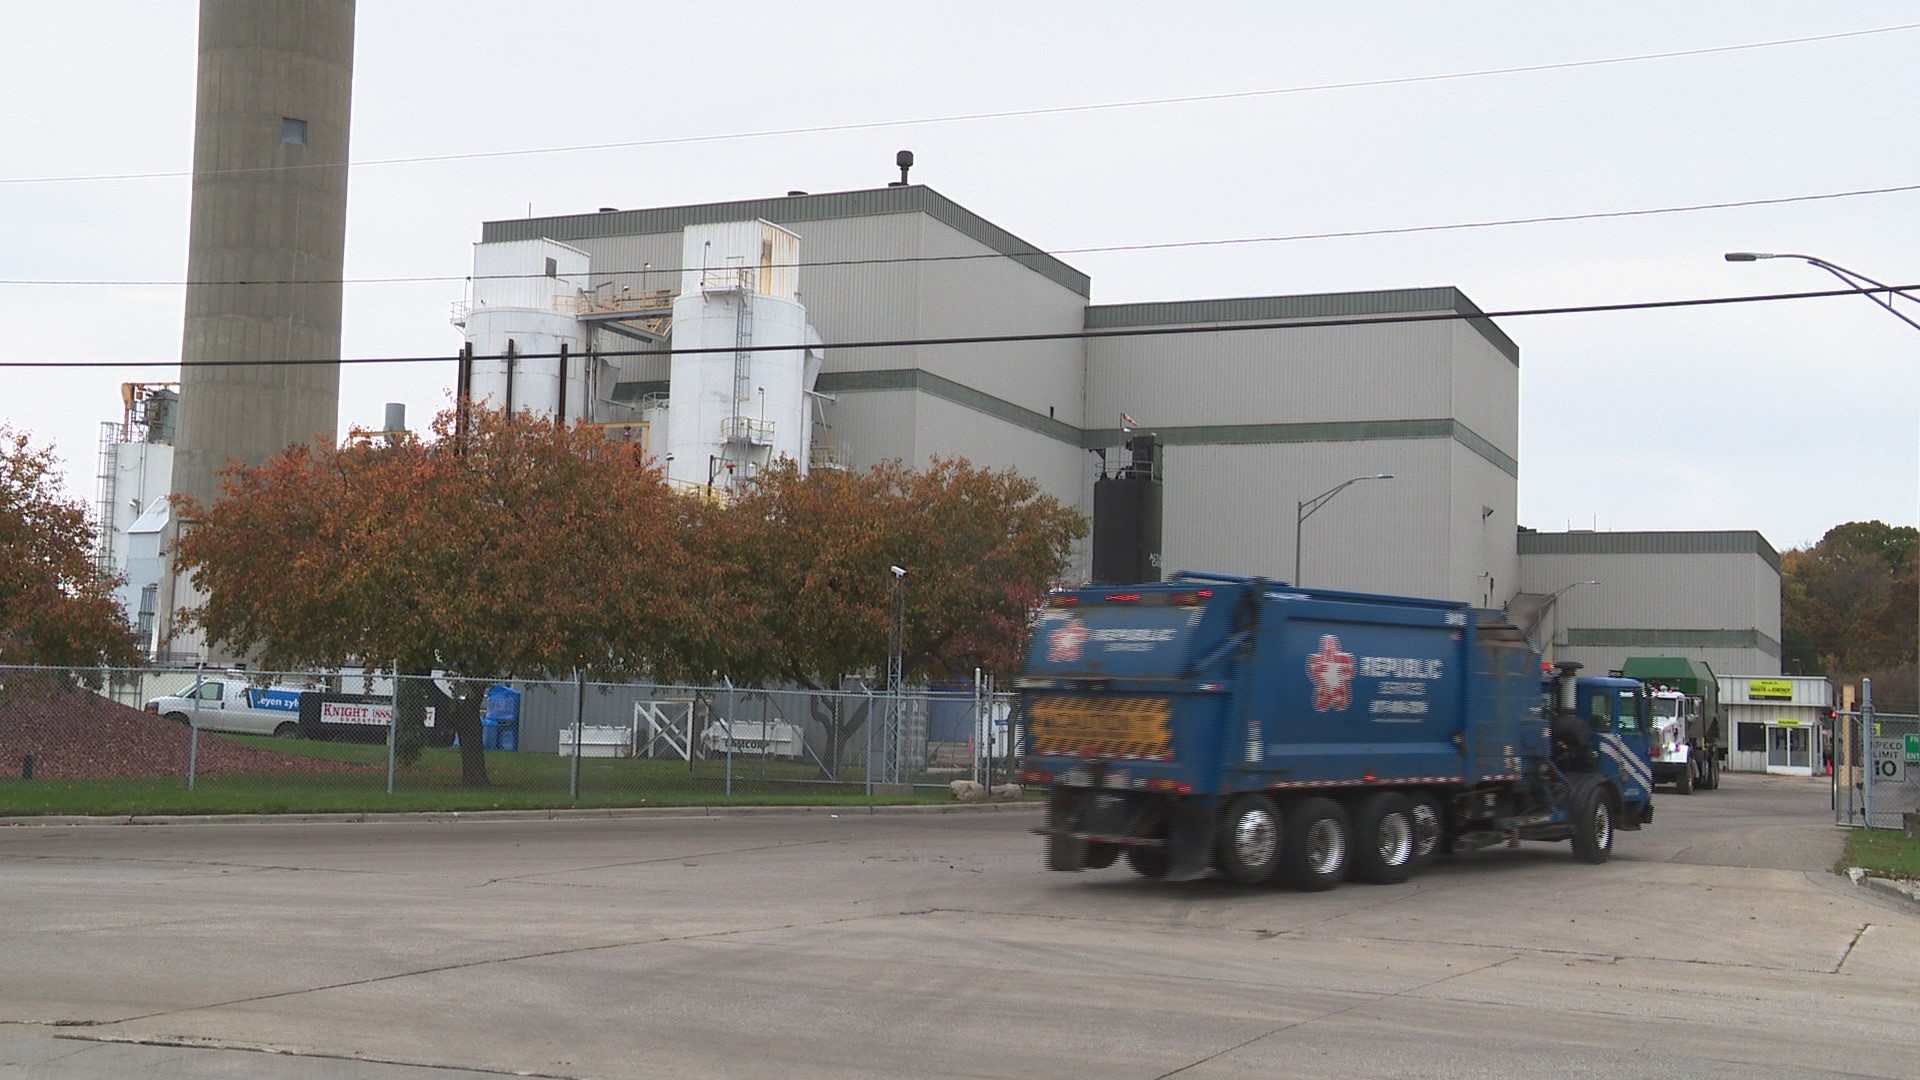 The Kent County waste incinerator has been in operation for more than 30 years. Environmentalists say its inclusion as a 'renewable energy' source is problematic.